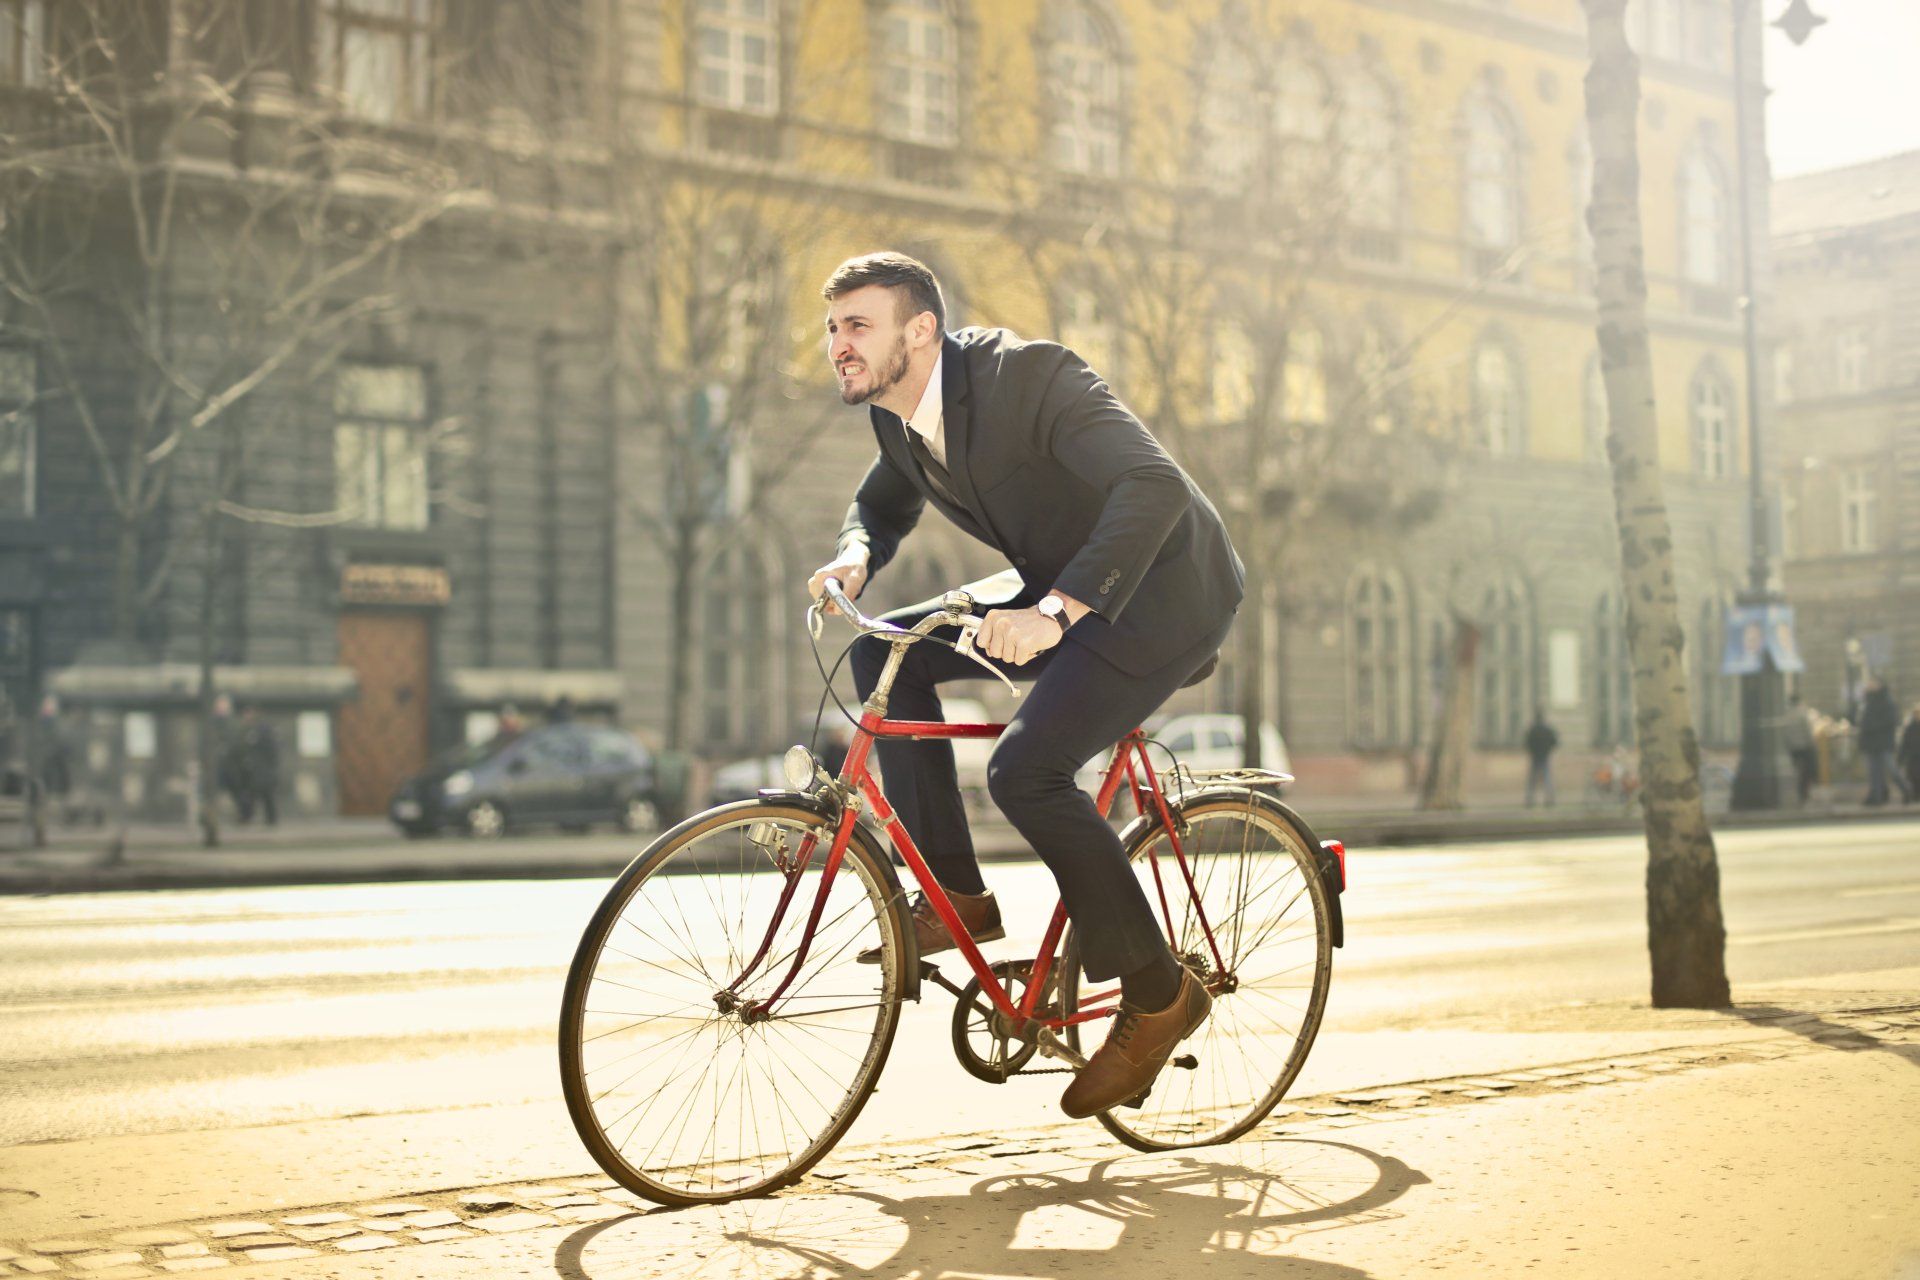 A man in a suit is riding a red bicycle down a city street.